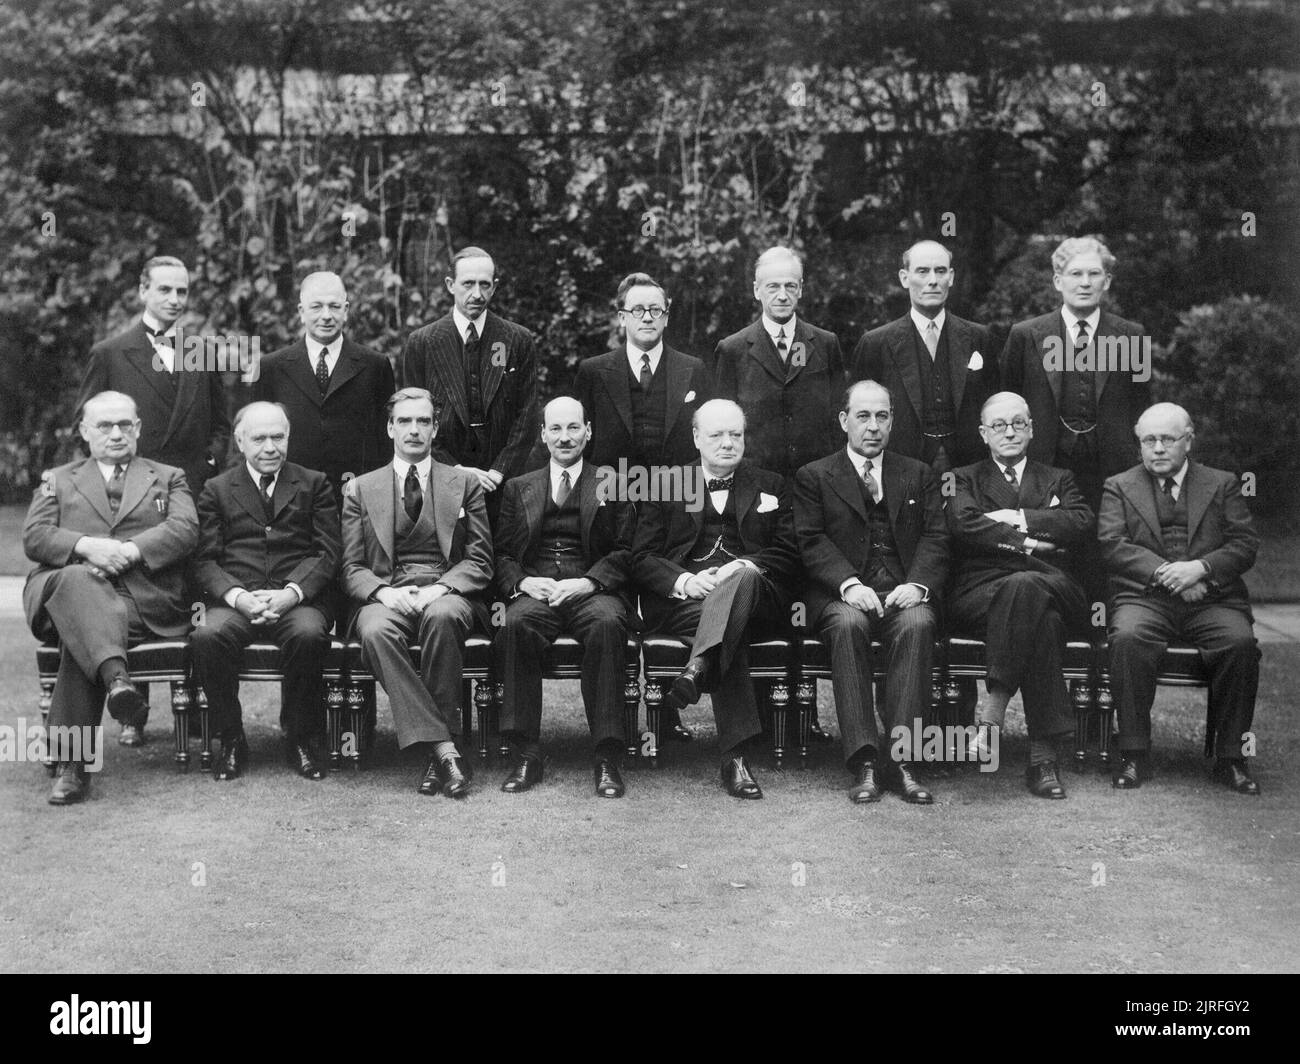 British Political Personalities 1936-1945 The Churchill Coalition Government 11 May 1940 - 23 May 1945: The Churchill Coalition War Cabinet: standing, from left to right, Sir Archibald Sinclair, Mr A V Alexander, Lord Cranborne, Herbert Morrison, Lord Moyne, Captain Margesson and Brendan Bracken. Seated, from left to right, Ernest Bevin, Lord Beaverbrook, Anthony Eden, Clement Attlee, Winston Churchill, Sir John Anderson, Arthur Greenwood and Sir Kingsley Wood. Stock Photo